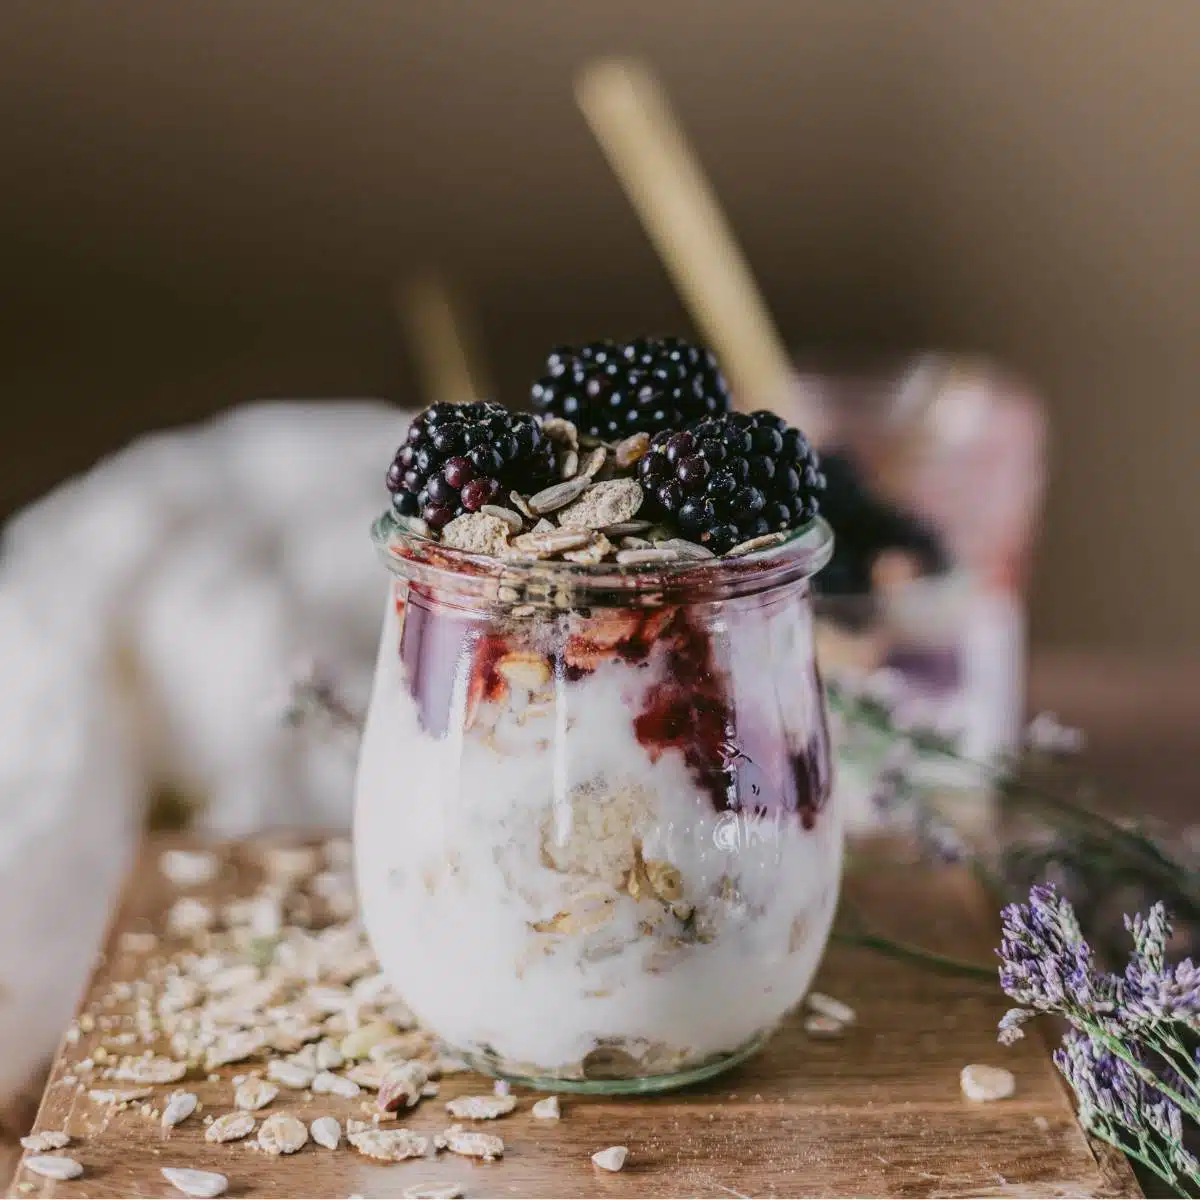 Overnight oats in a jar on a table.